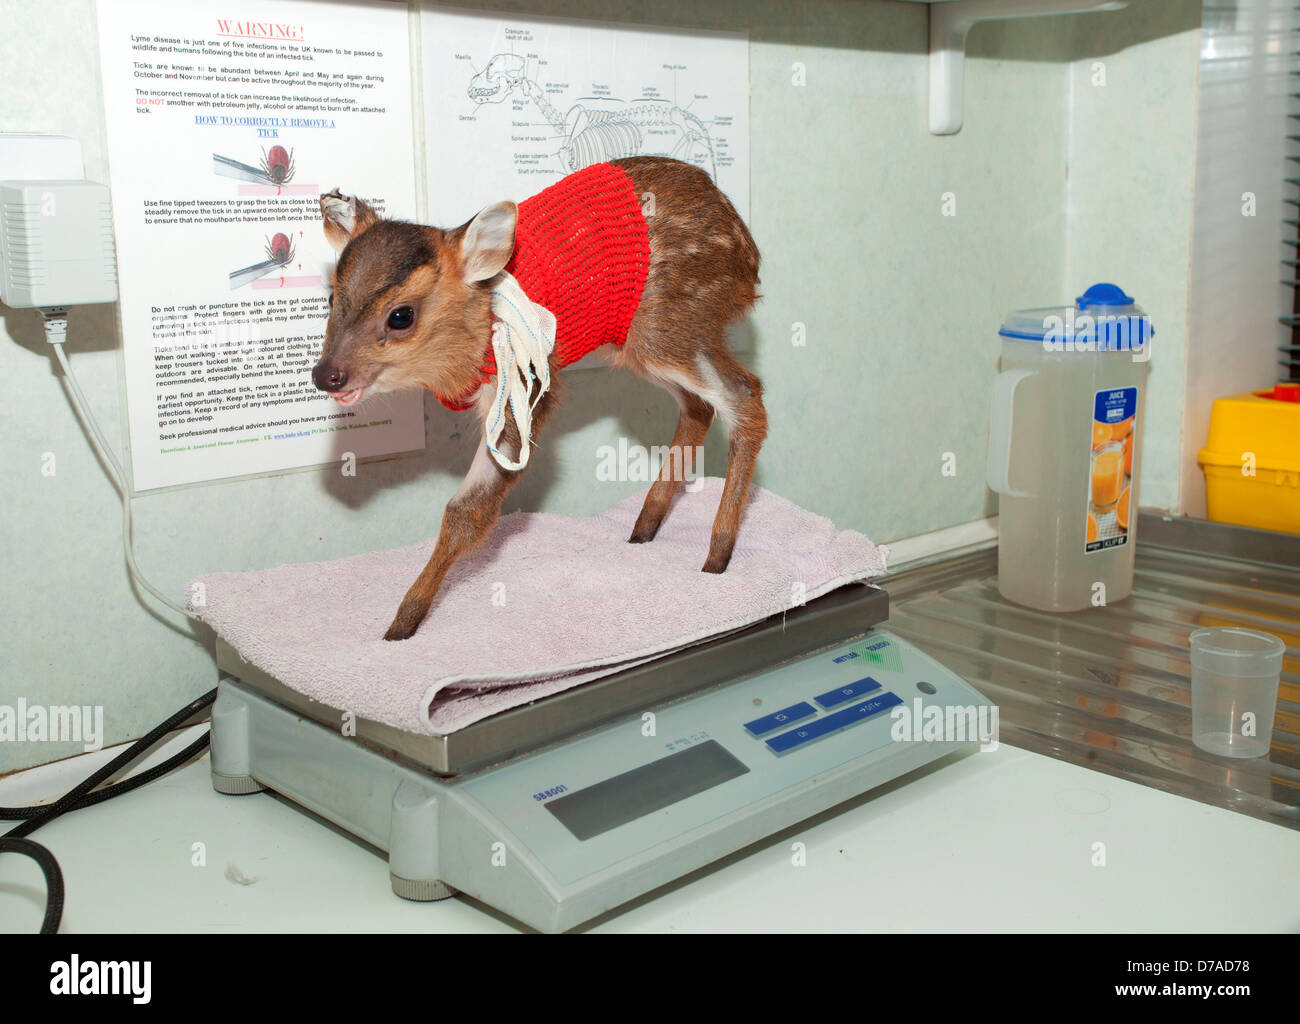 Muntjac Deer Muntiacus reevesii Fawn fractured humerus intramedullary pinned strapped on weight Stock Photo